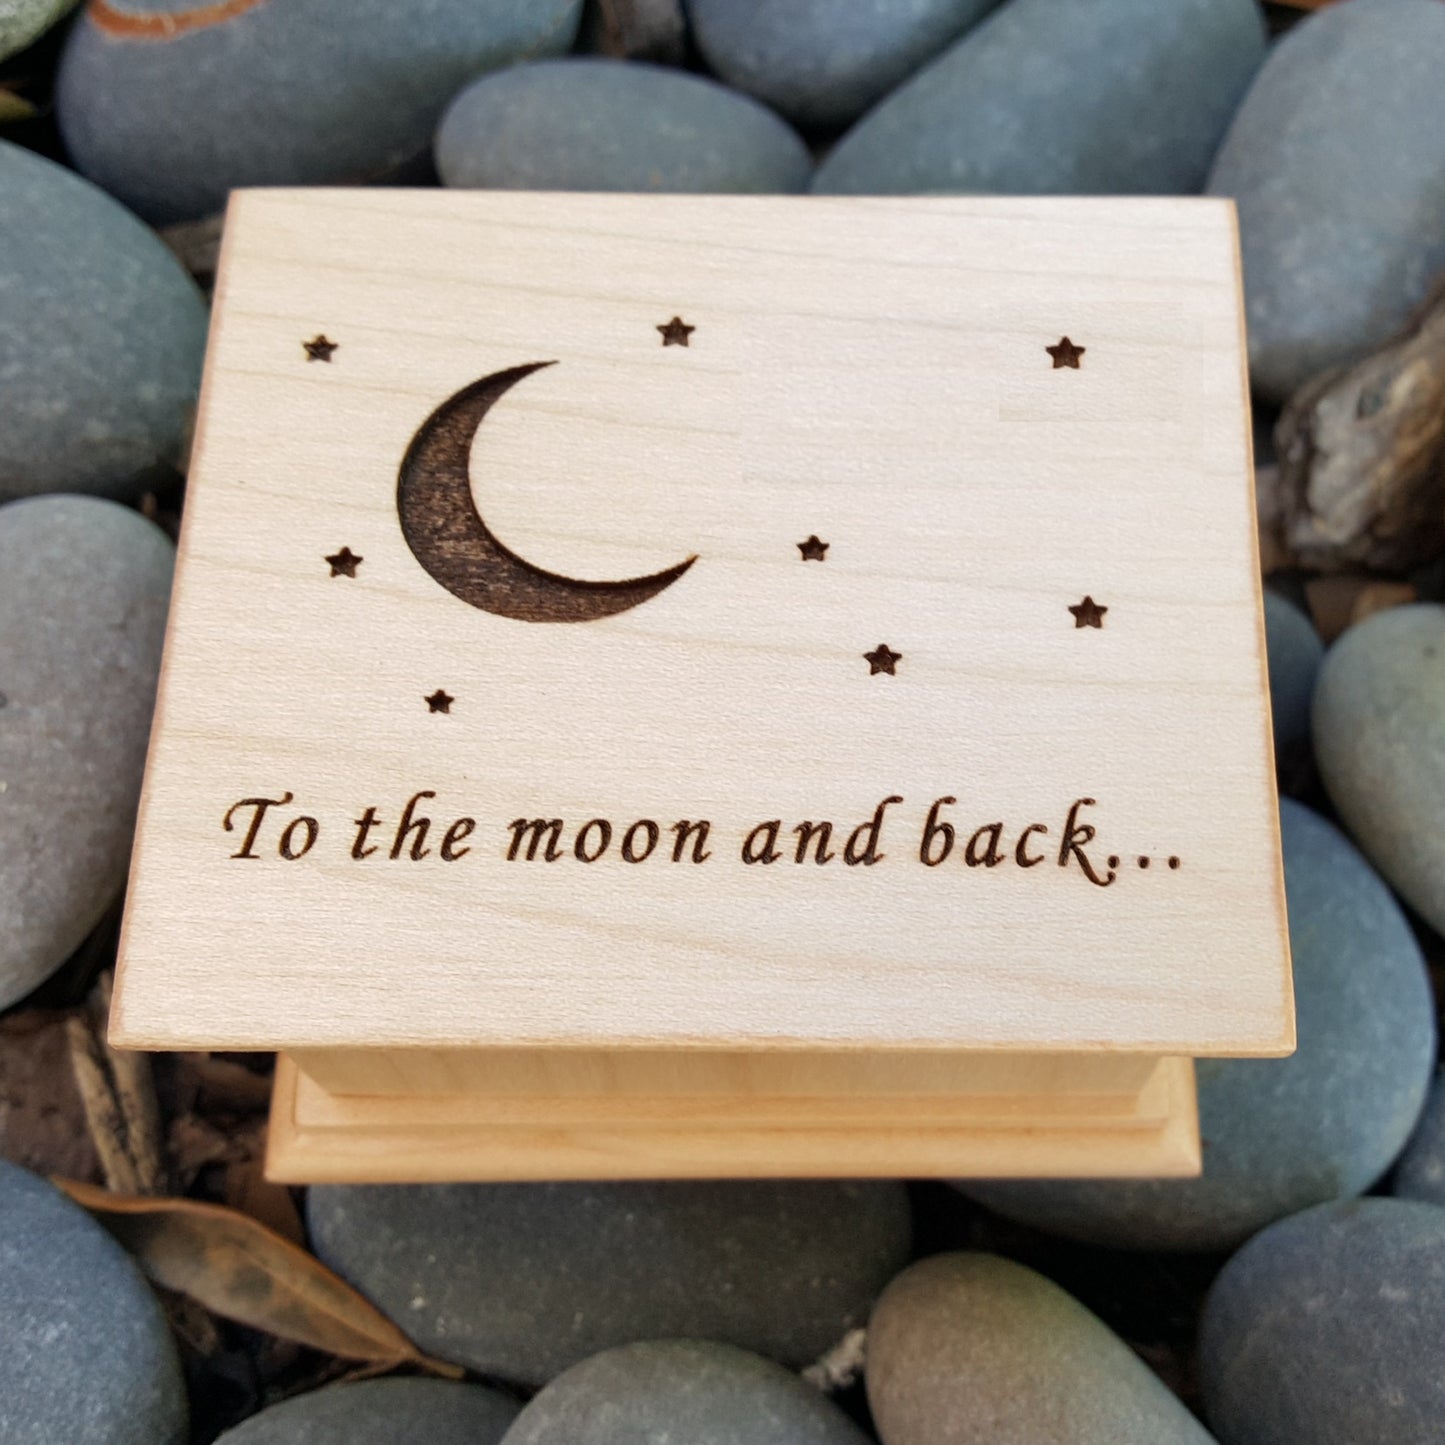 I love you to the moon and back music box